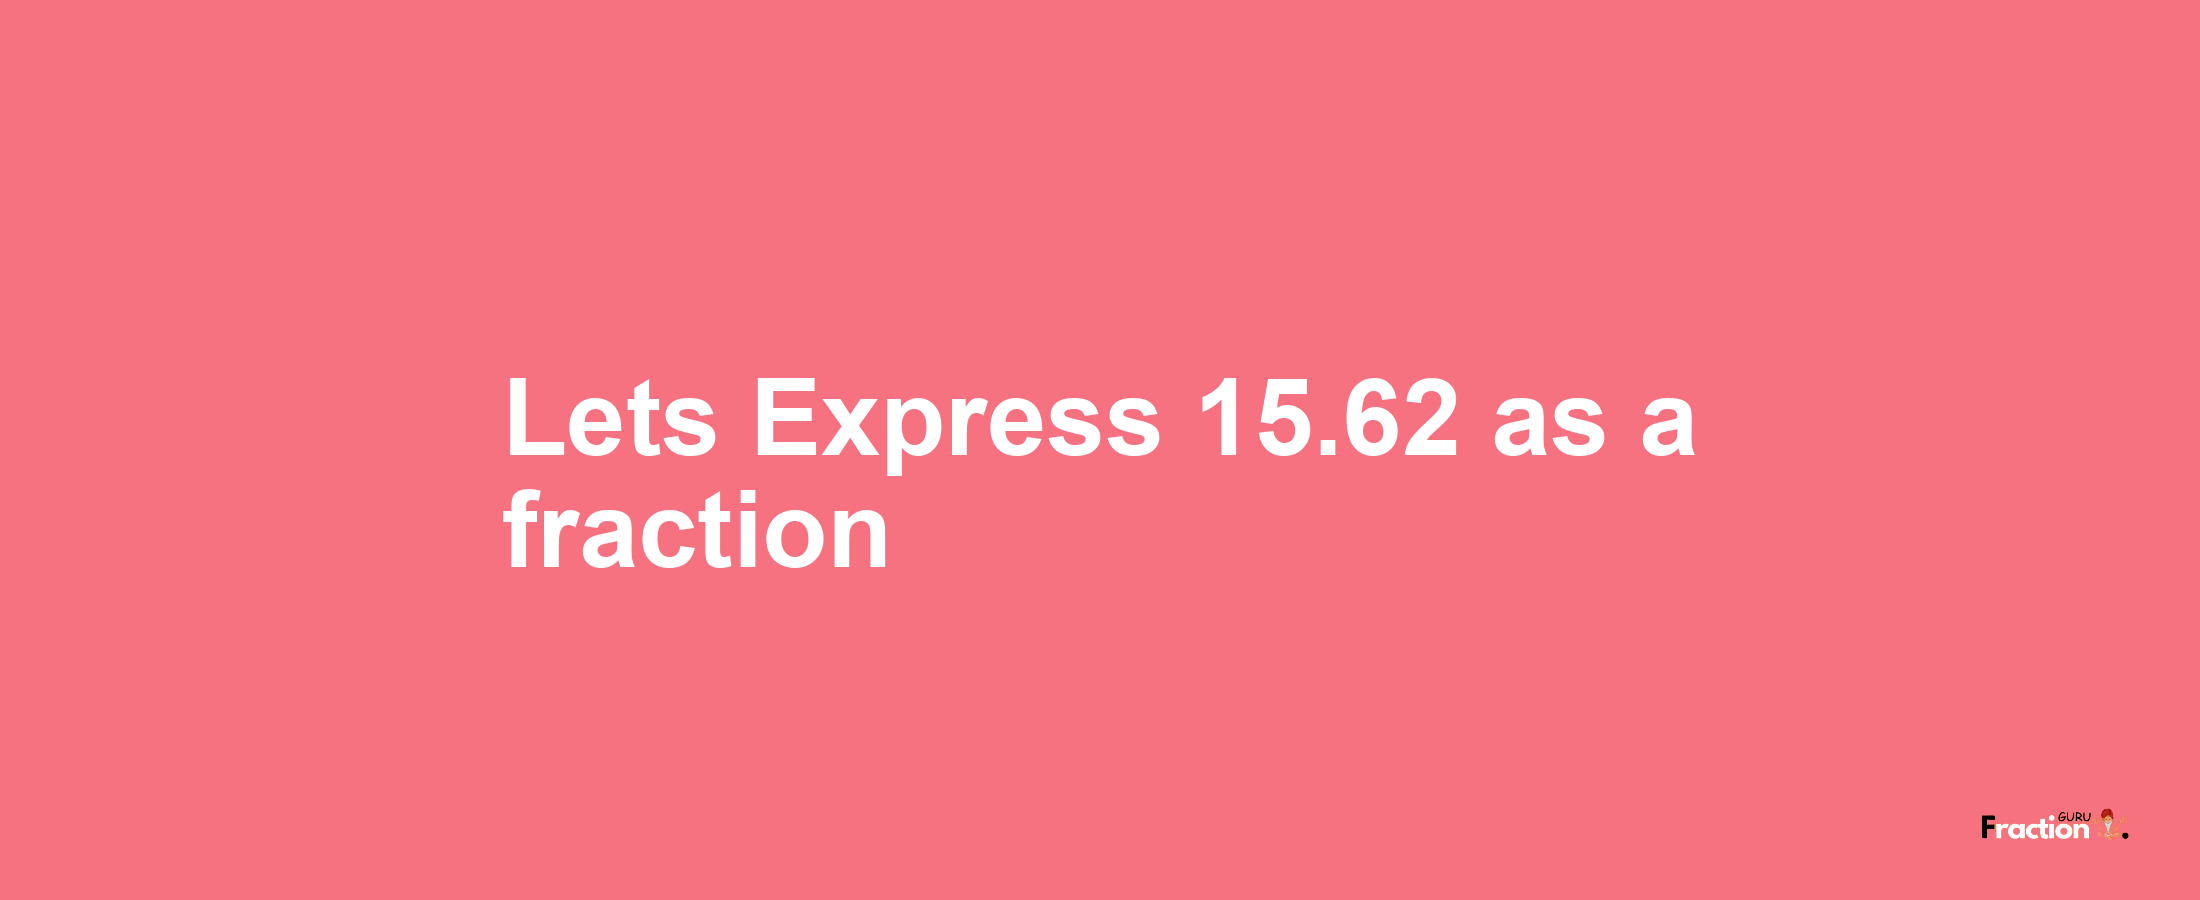 Lets Express 15.62 as afraction